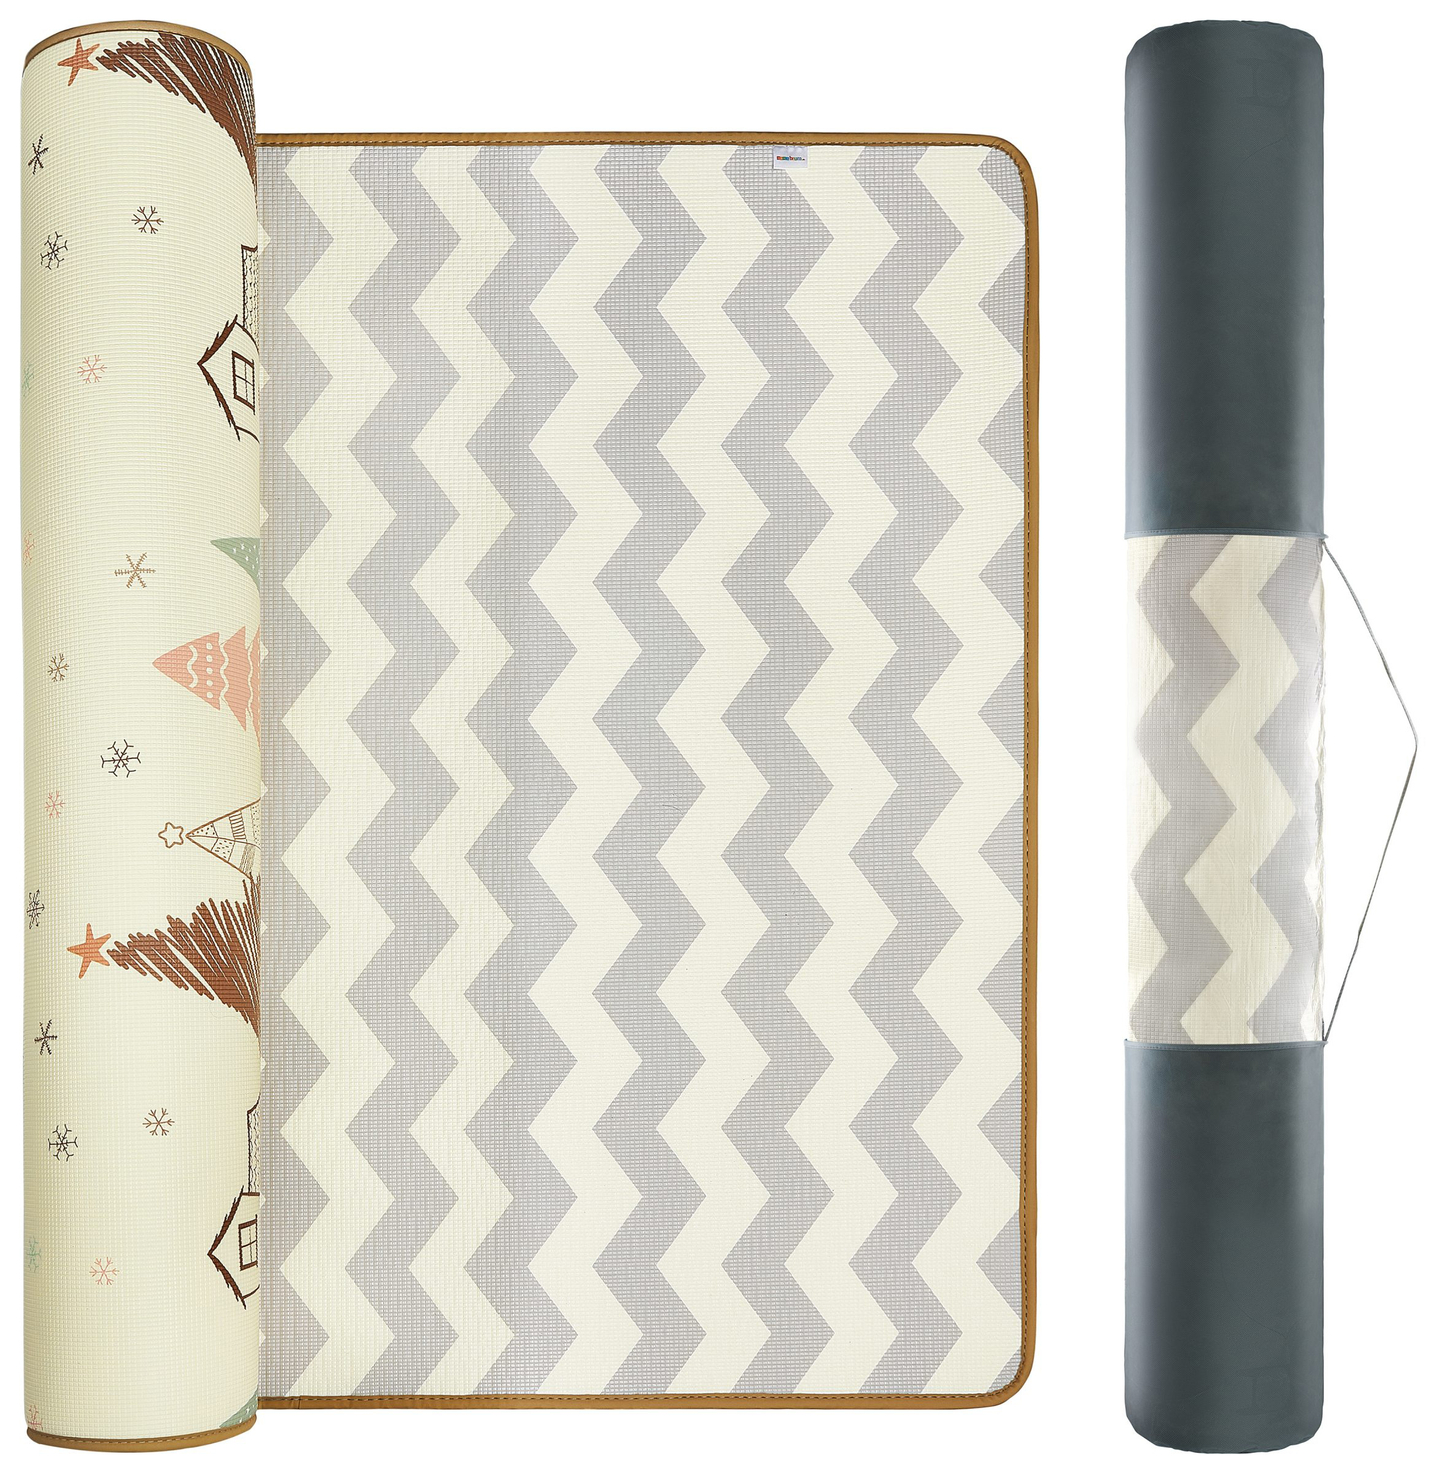 Double-sided foam mat XXL - roll 2 cm  (patterns: forest and zigzags)